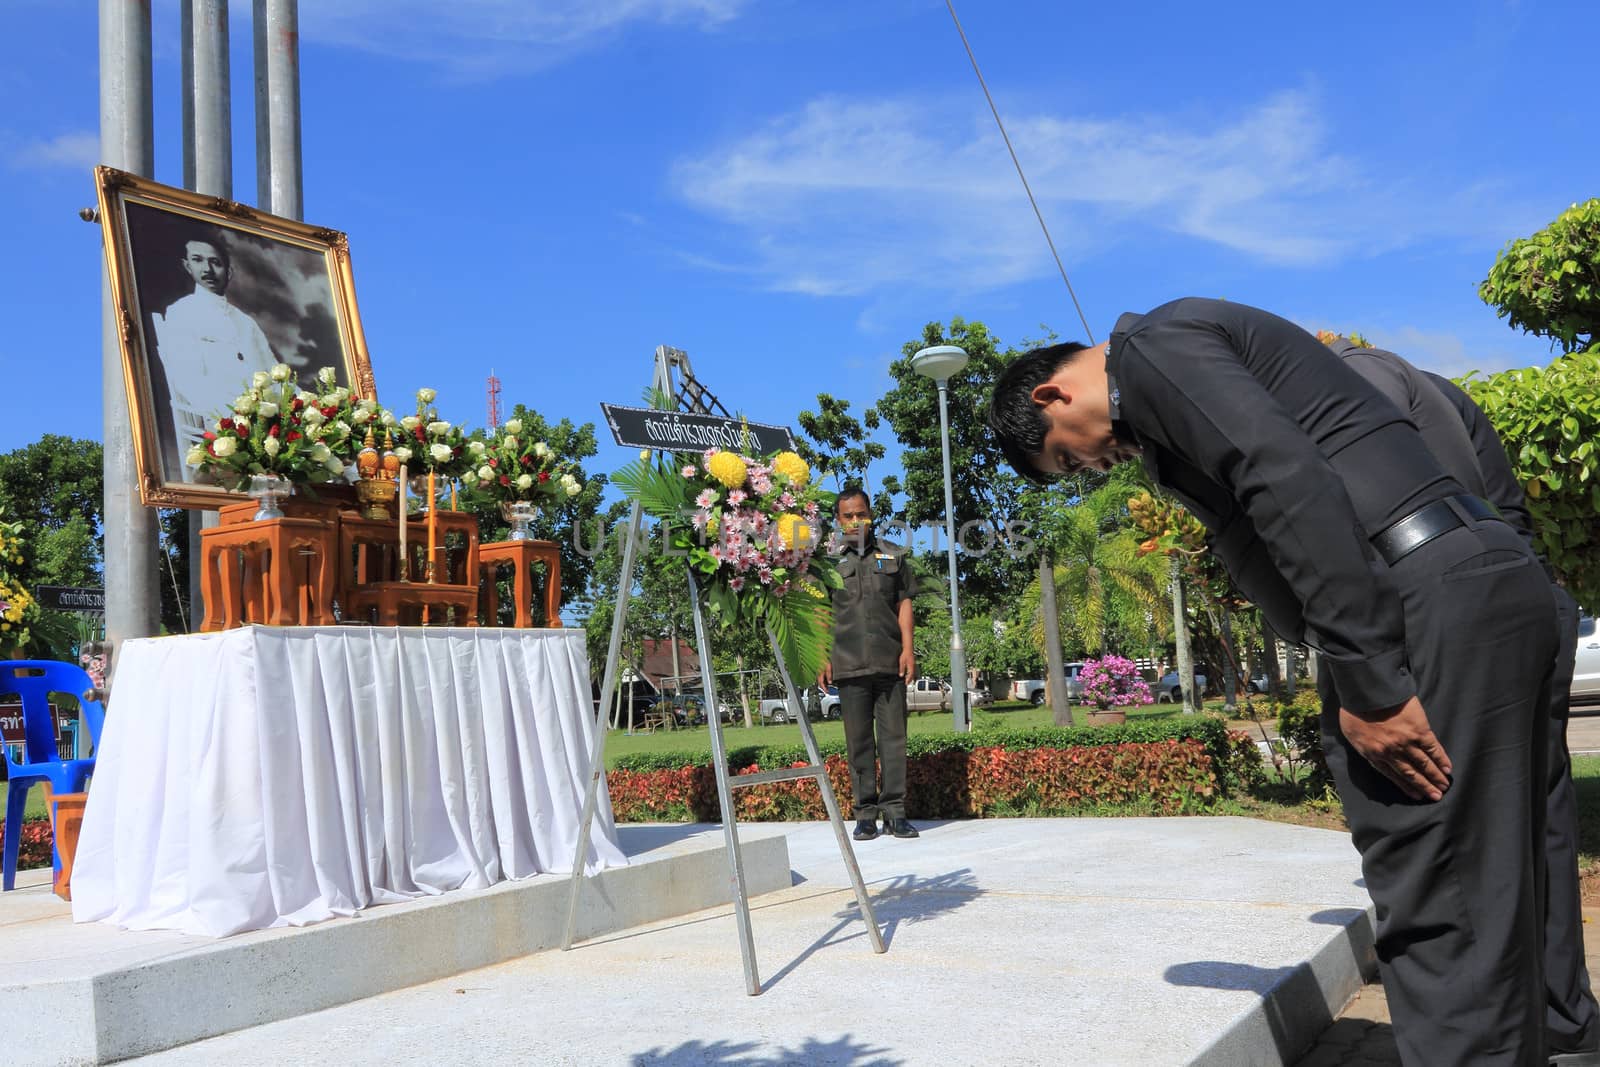 SURAT THANI, THAILAND - AUGUST 7 : Superintendent of the Amphoe Motai Police Station lay wreath to the picture of Rapee Pattanasak on Rapee Day Prince Rapee Pattanasak, the father of Thailand's modern legal system on August 7, 2013 in Surat Thani, Thailand.